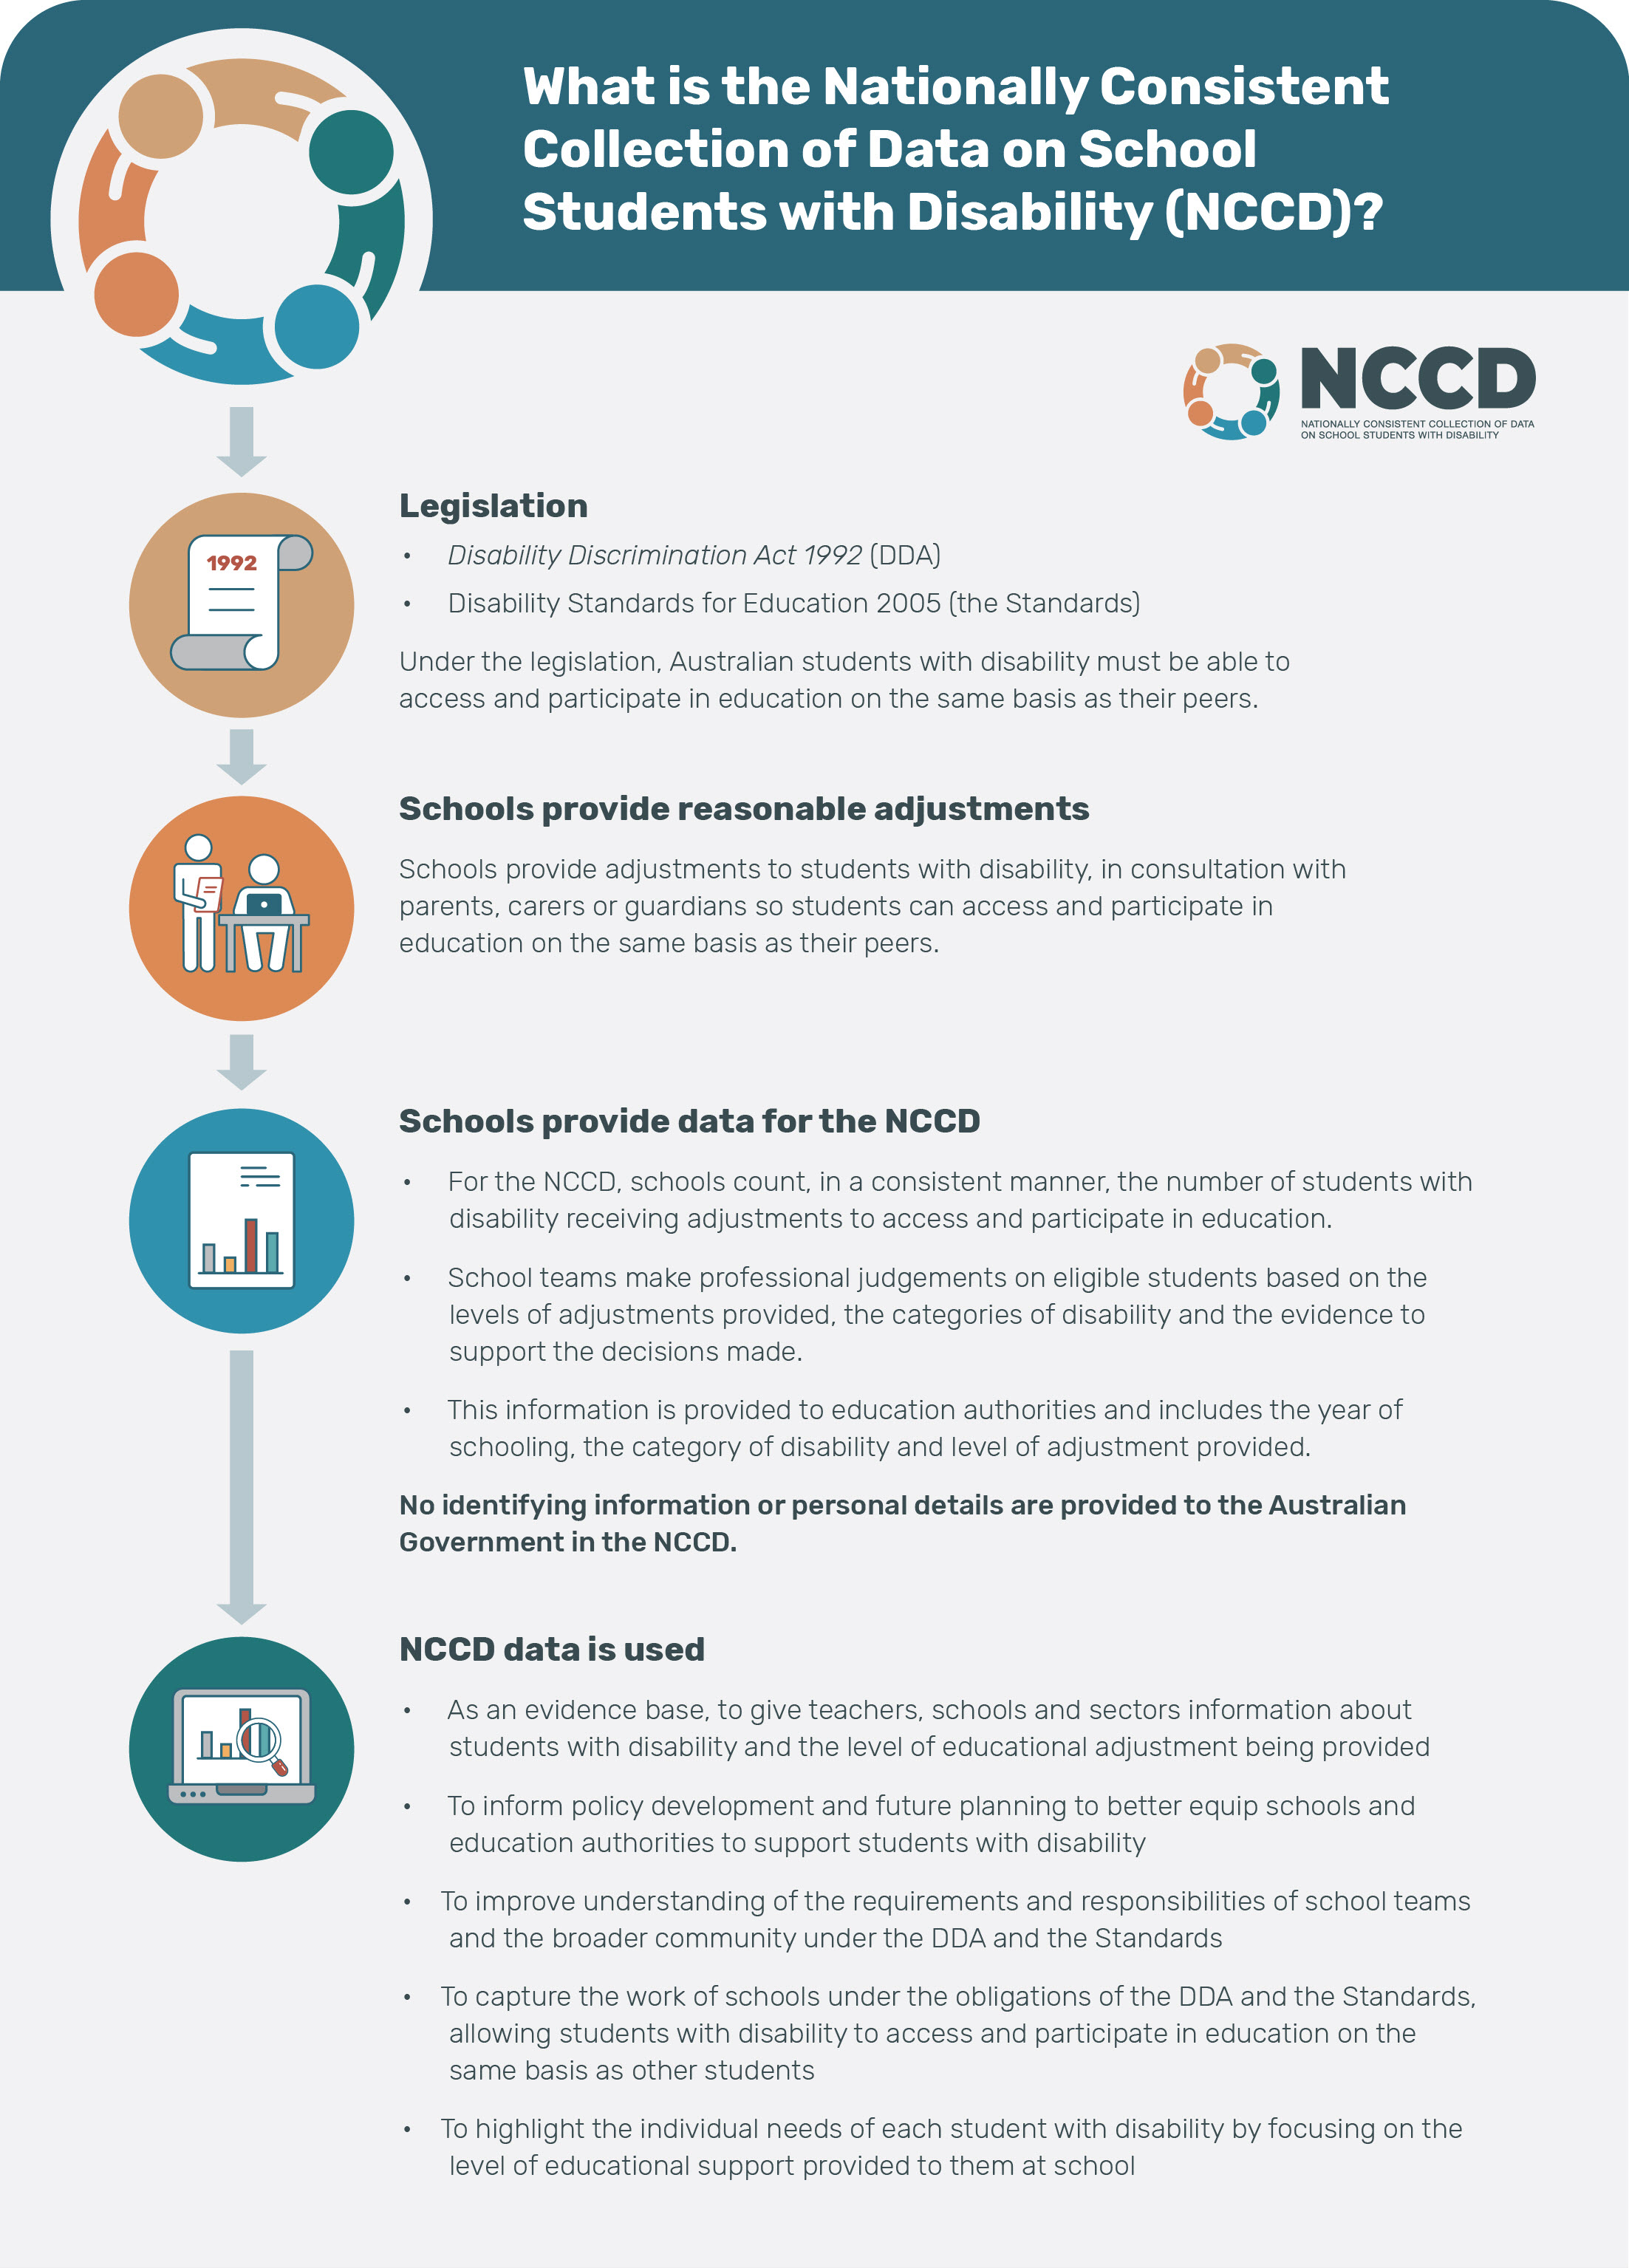 What is the NCCD? - Nationally Consistent Collection of Data